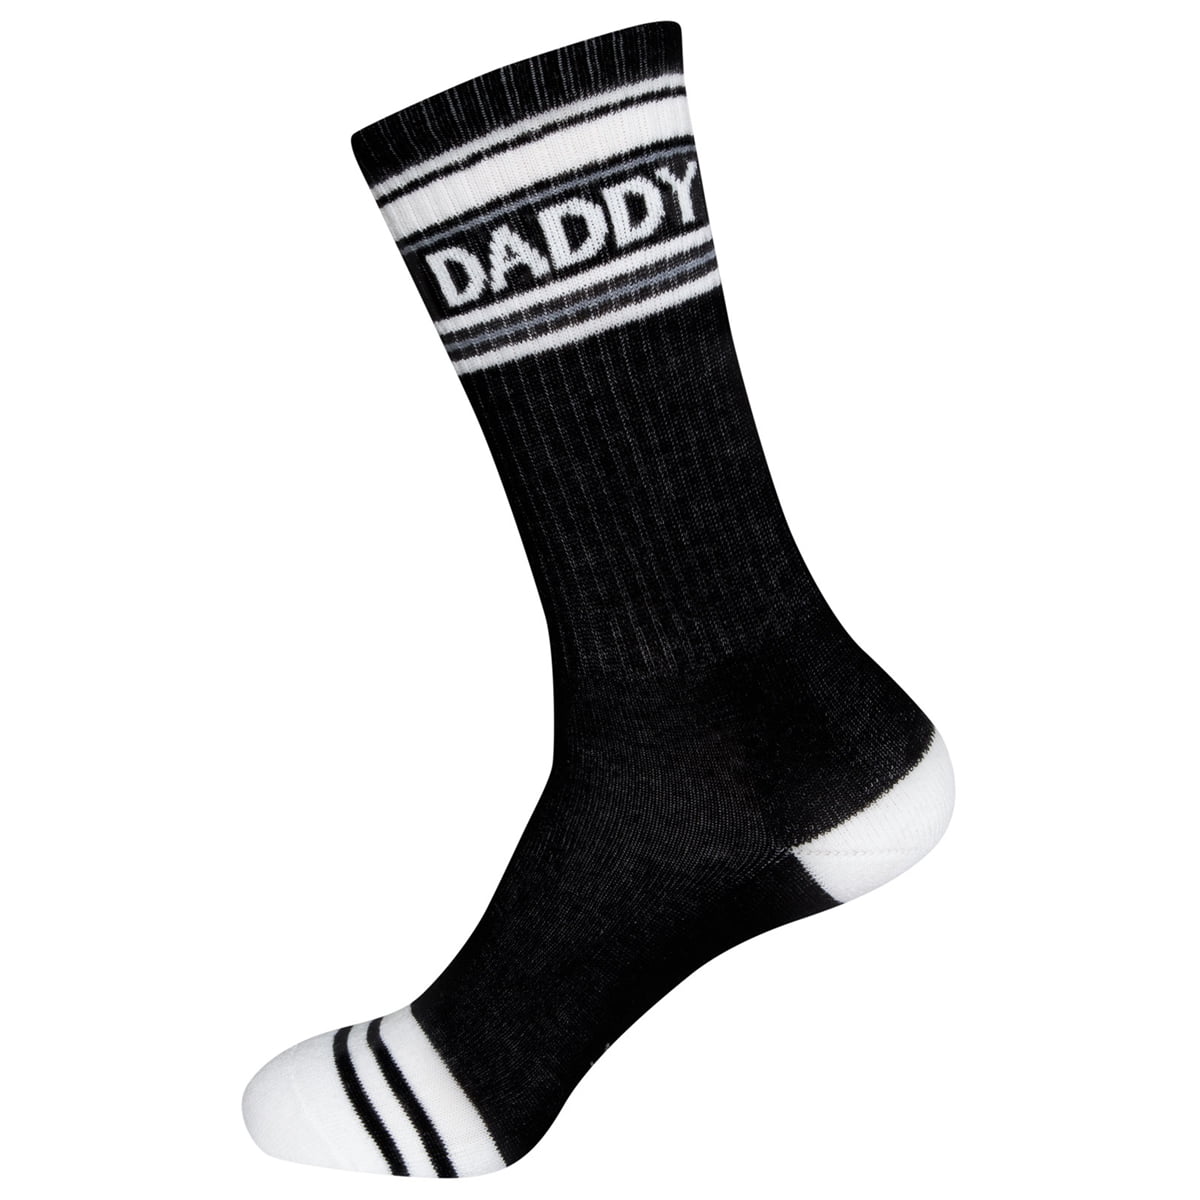 Gumball Poodle Groom Mens Black And White Crew Socks